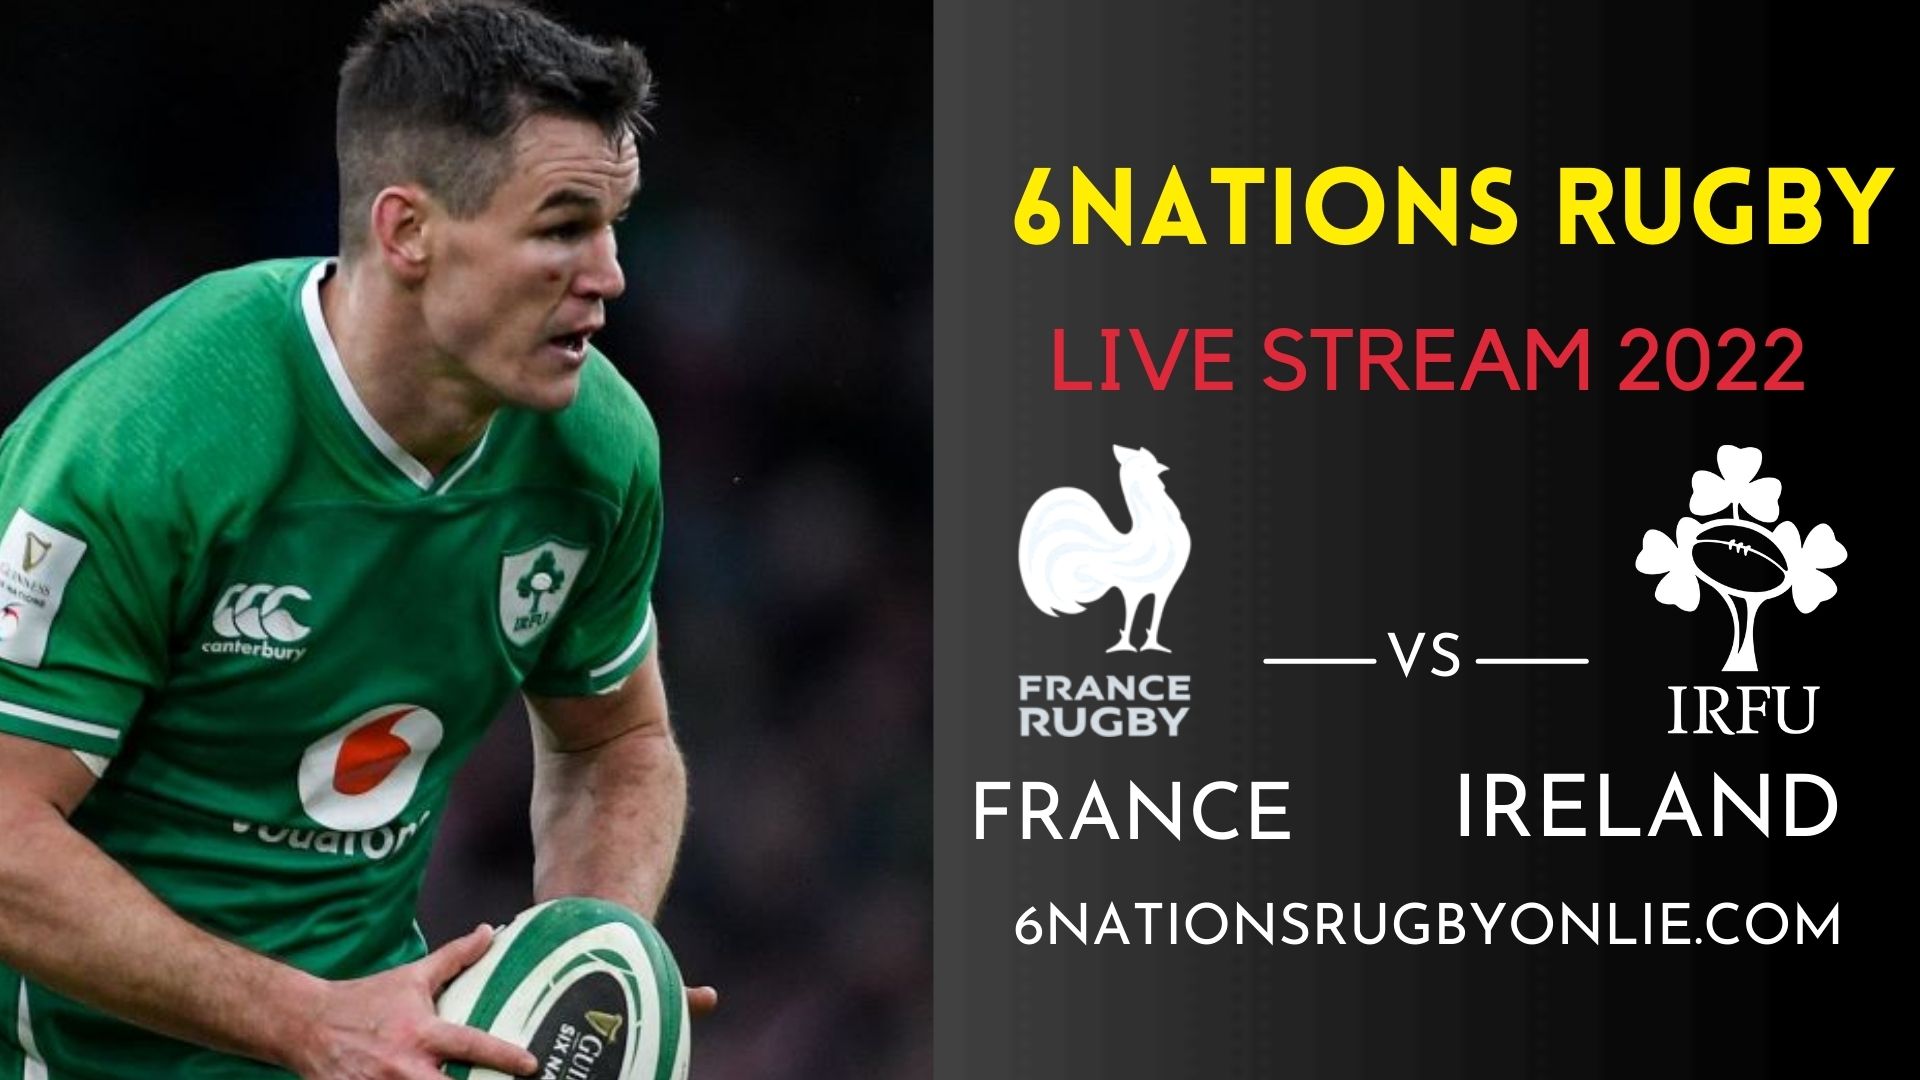 France VS Ireland Rugby Live Stream On 10 March 2019